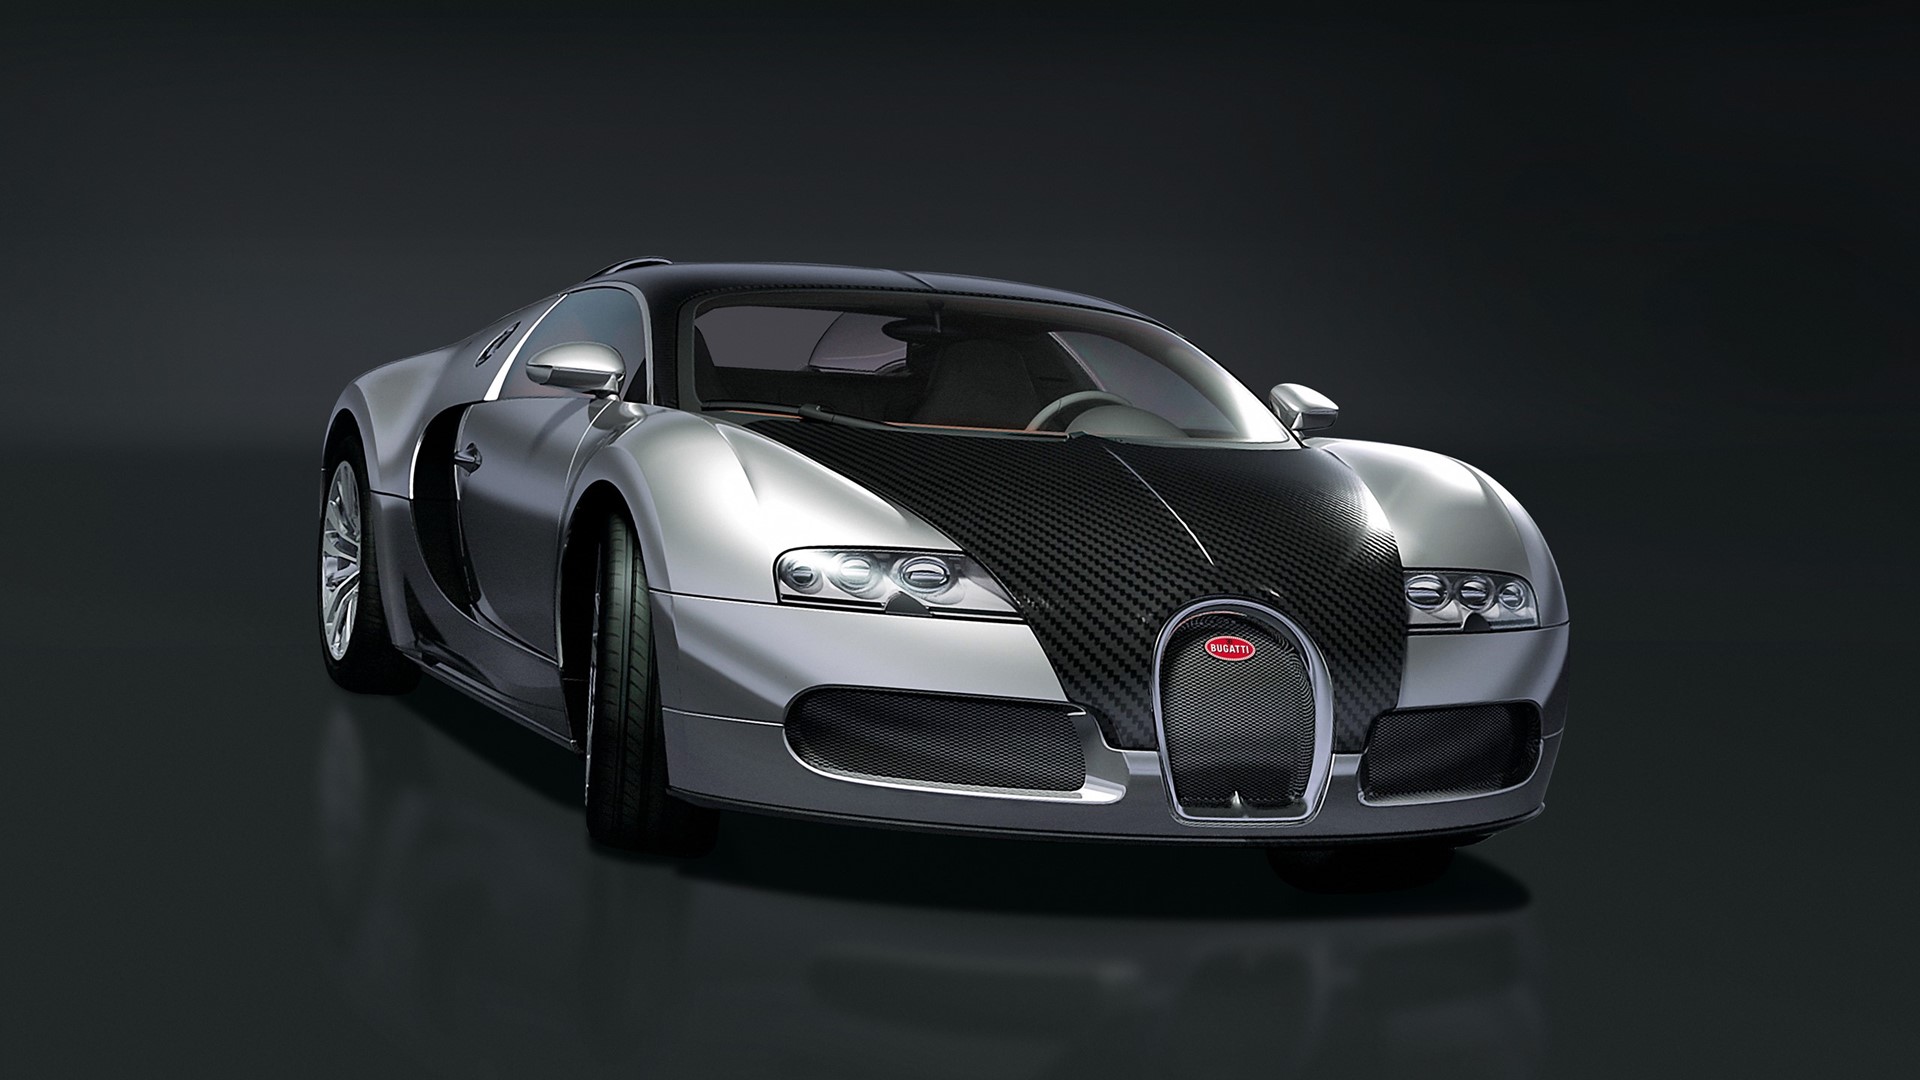 Detail Images Of A Bugatti Veyron Nomer 11